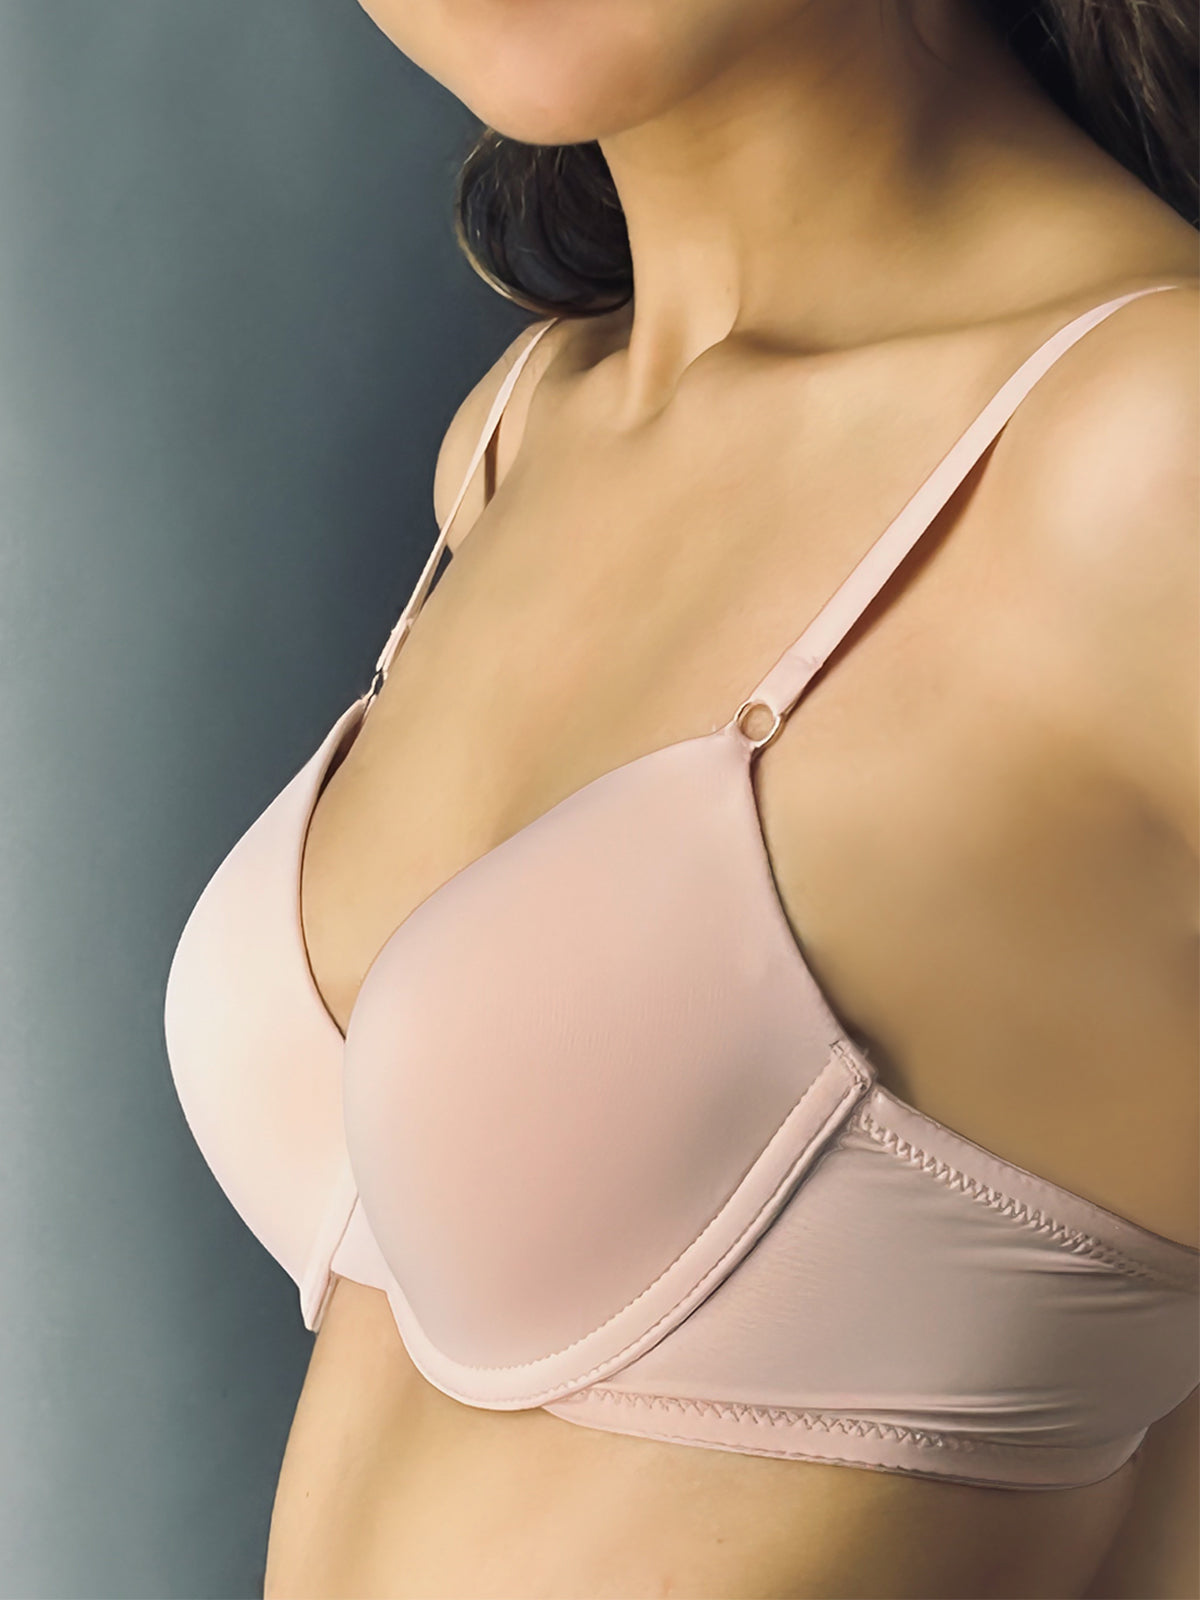 Shop Padded T-Shirt Bra Seamless Full Coverage LIVELY, 53% OFF